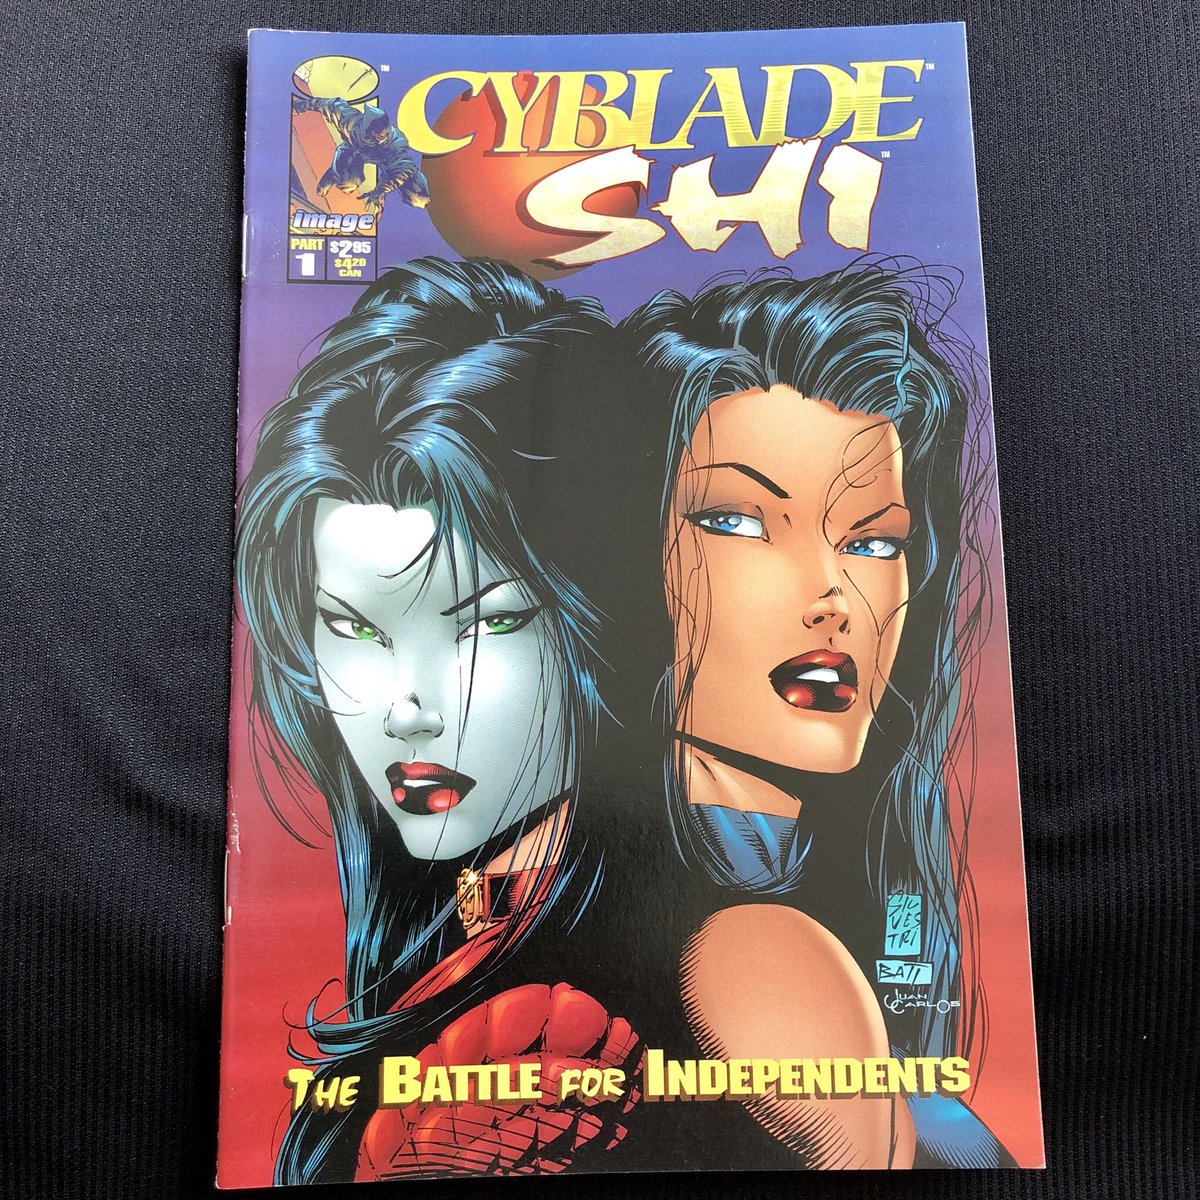 1st appearance of #Witchblade the #TopCow cash-cow during the #badgirl #comics era. Claim it now for $5.00 shipped!! #cheapcomics #5BuckStuff